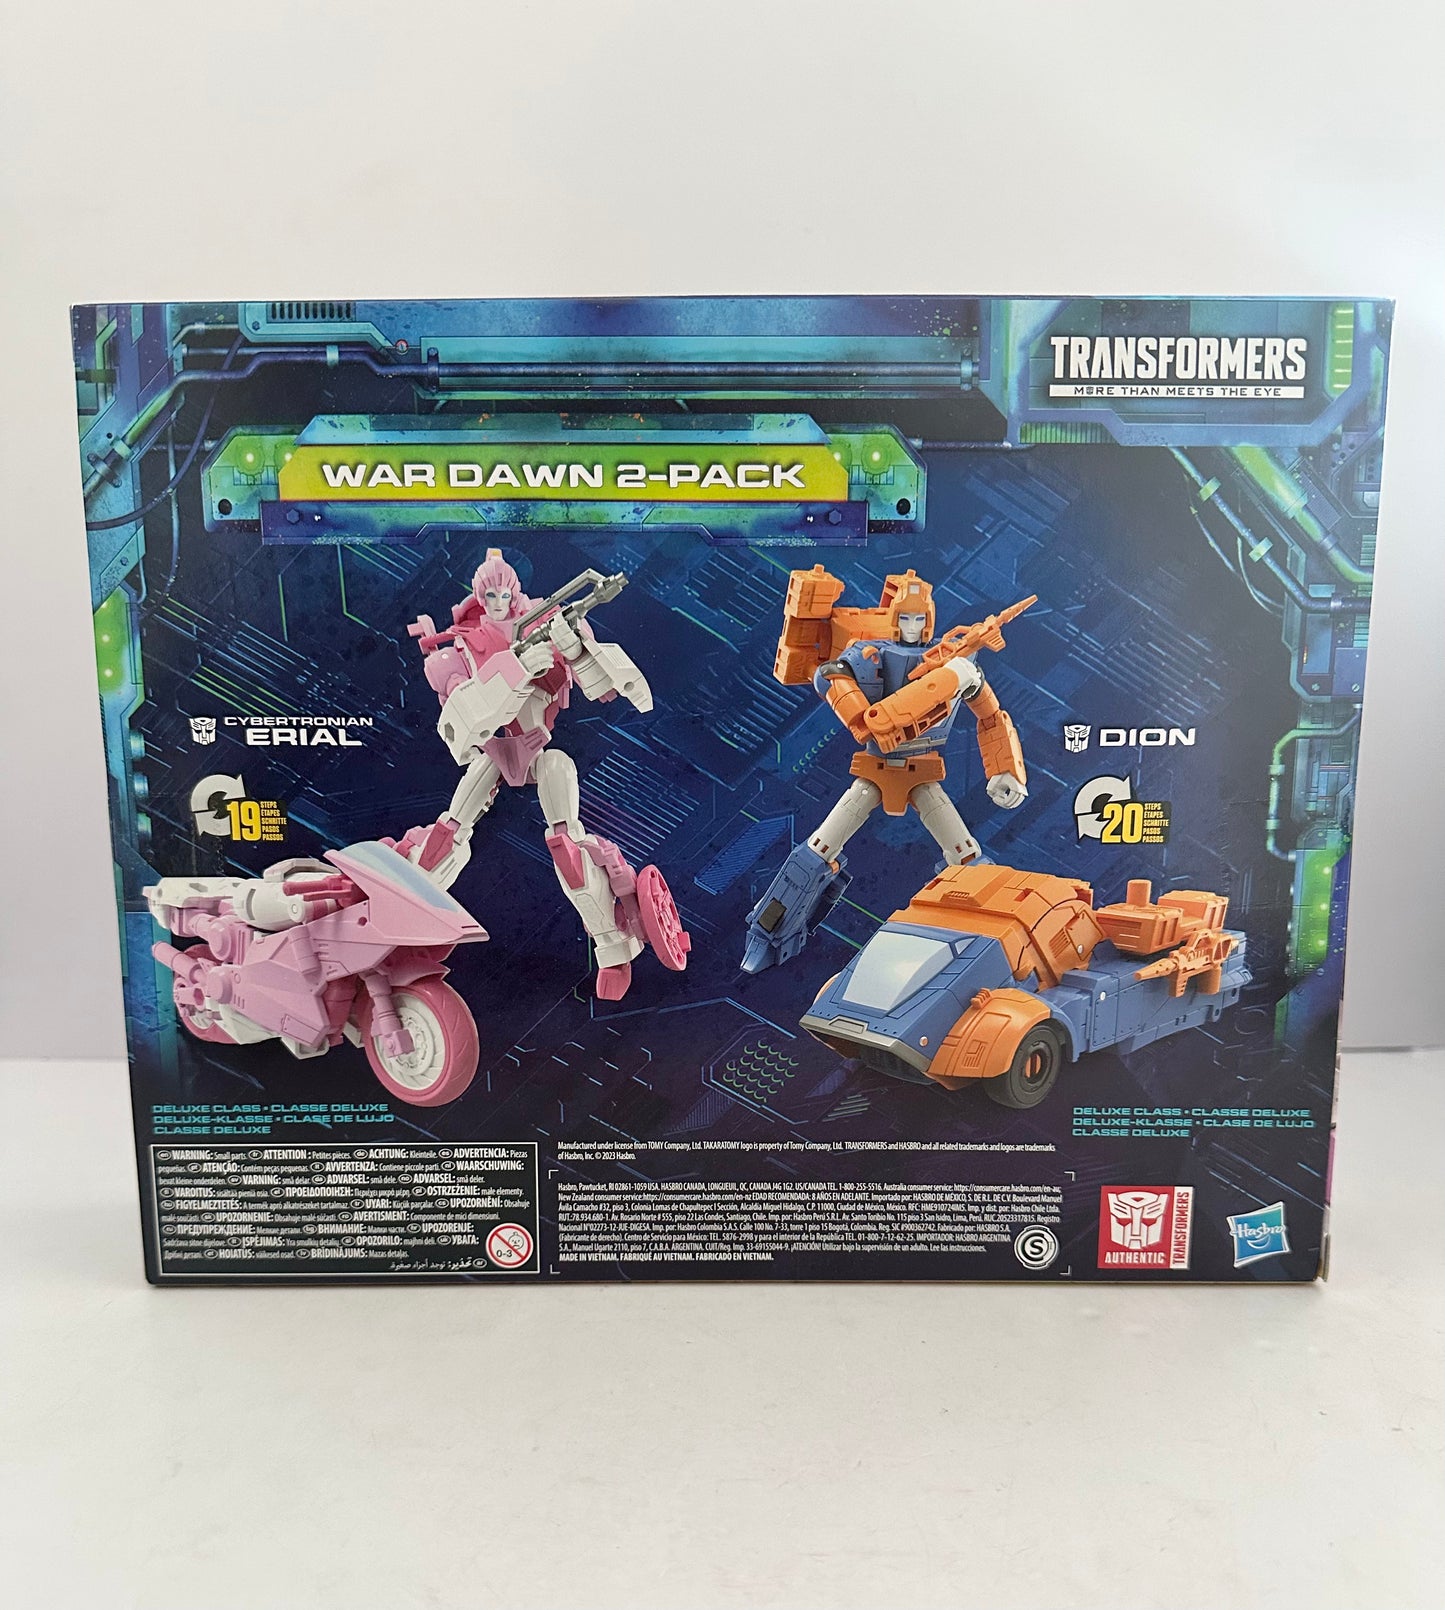 Transformers Legacy Evolution War Dawn 2-Pack Erial And Dion SDCC Exclusive